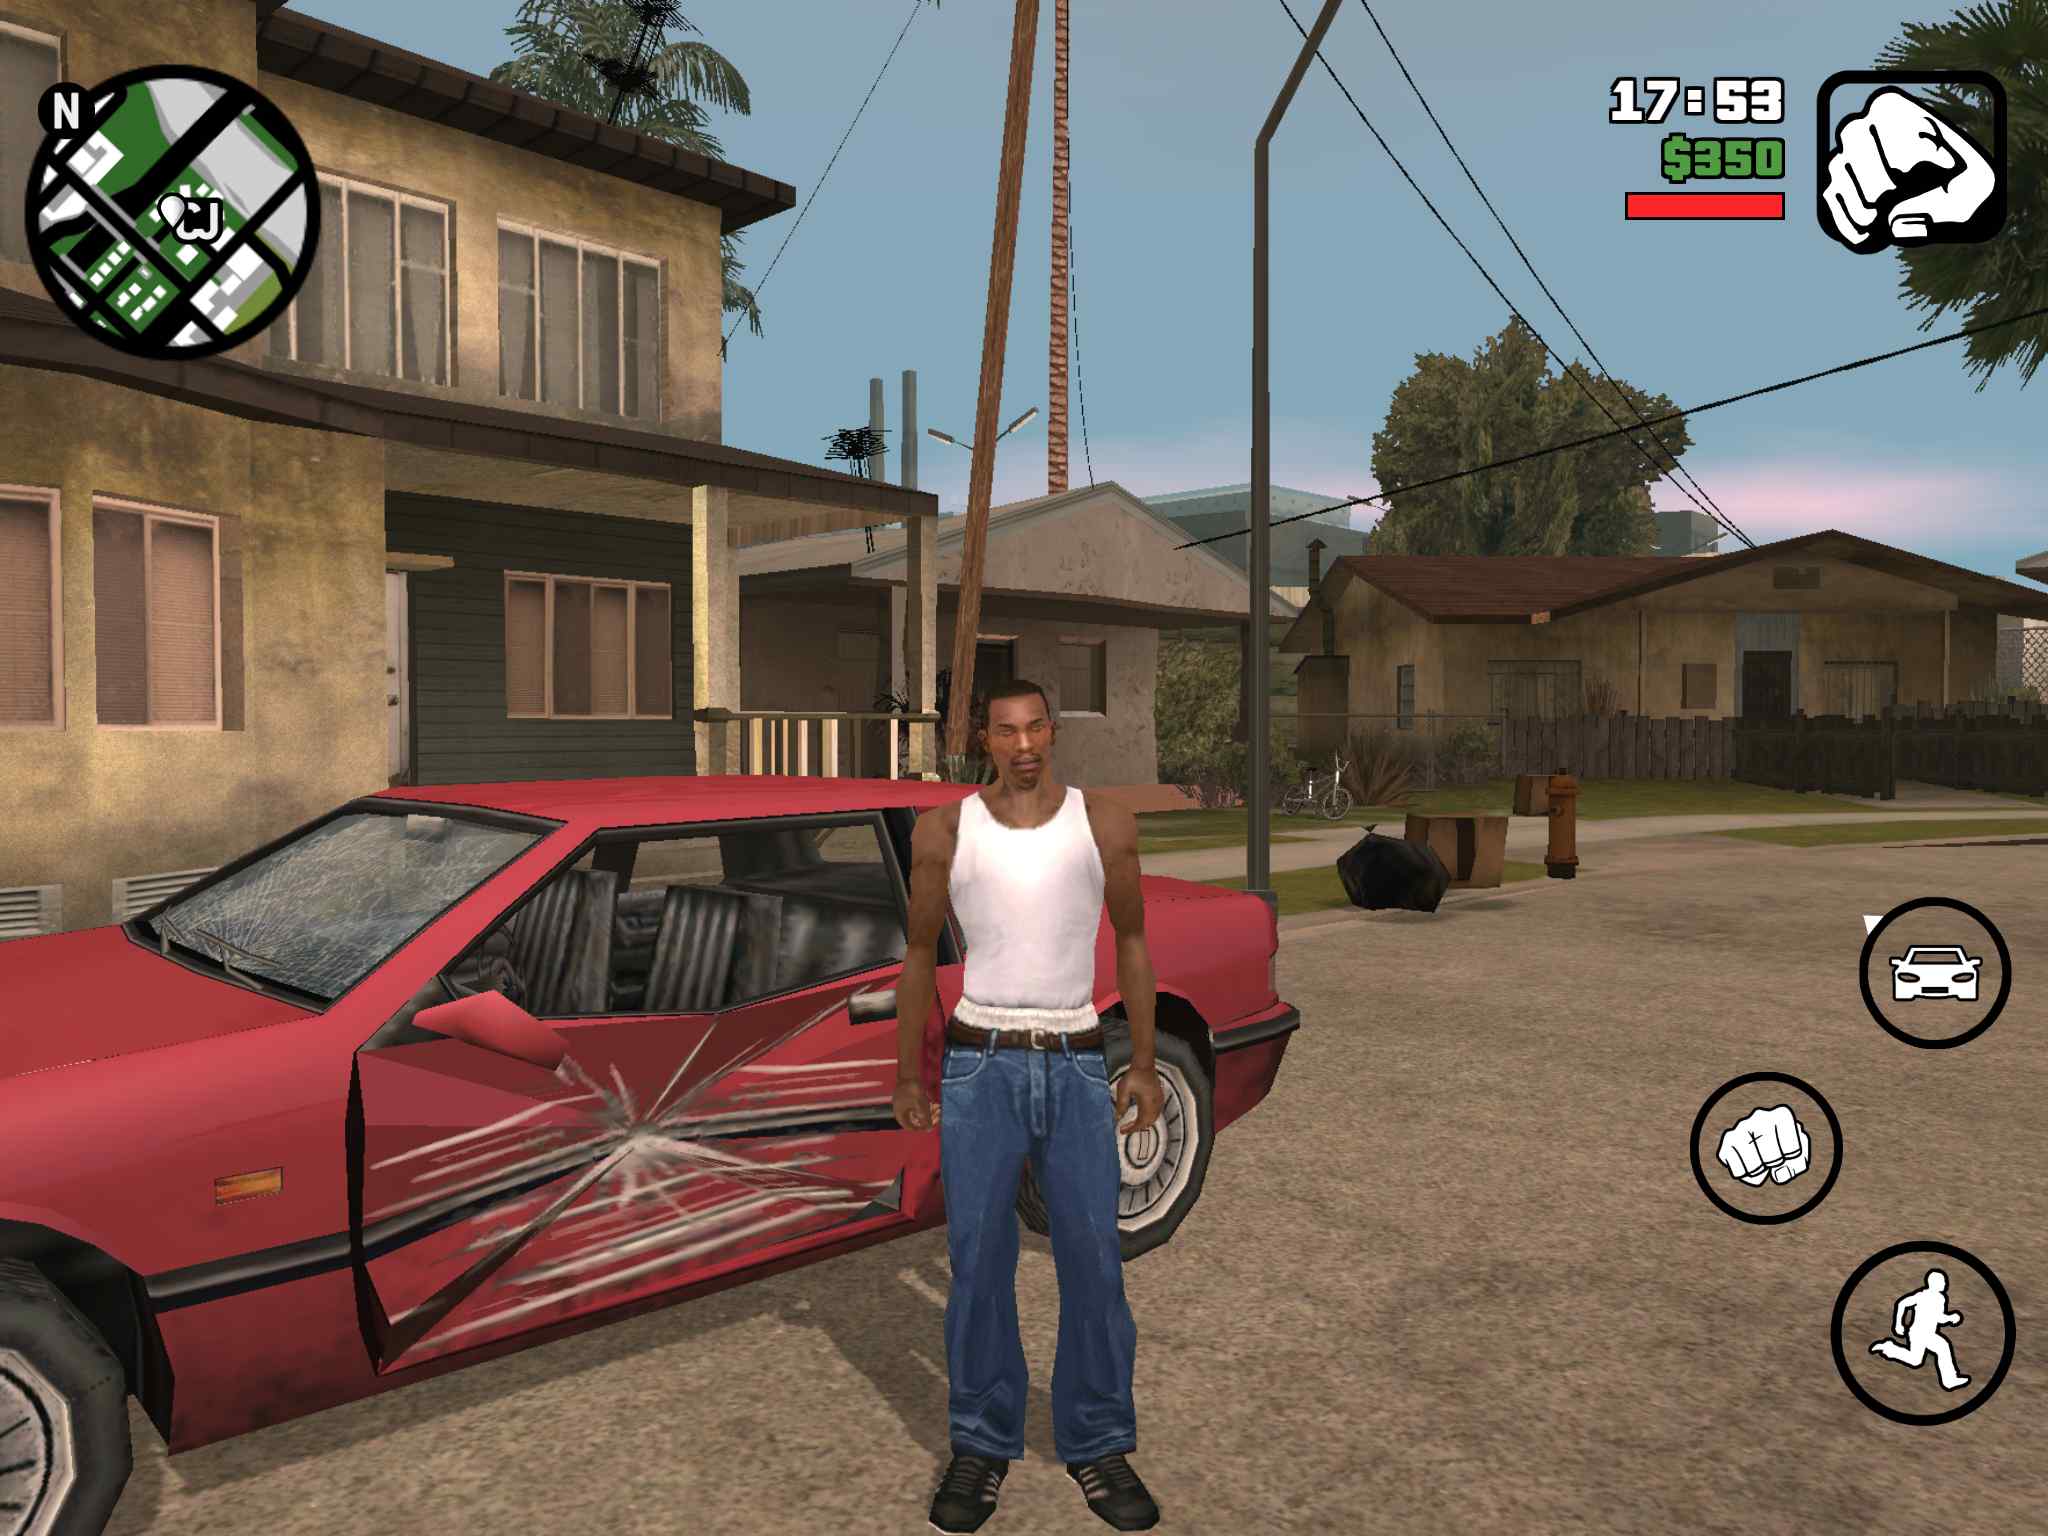 GTA San Andreas Cheats for Mobile (Android, iOS/iPhone) - GameRevolution